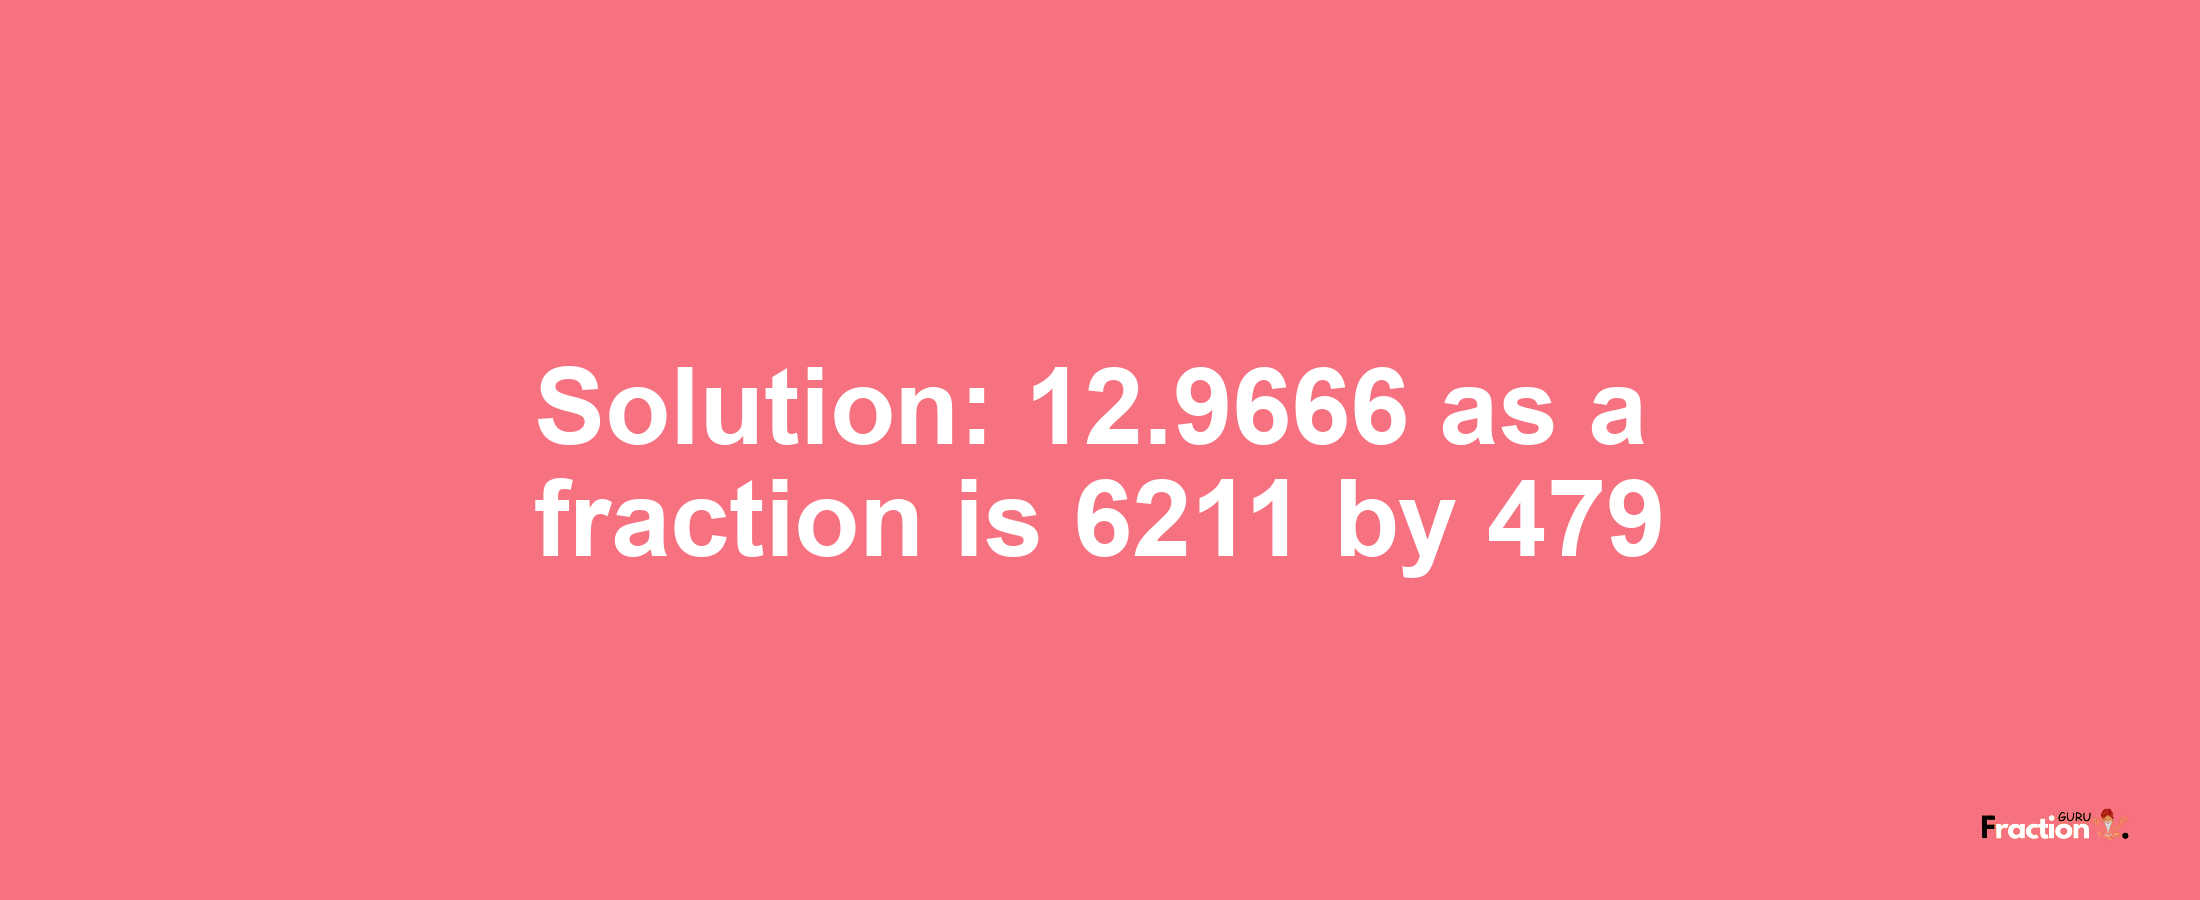 Solution:12.9666 as a fraction is 6211/479